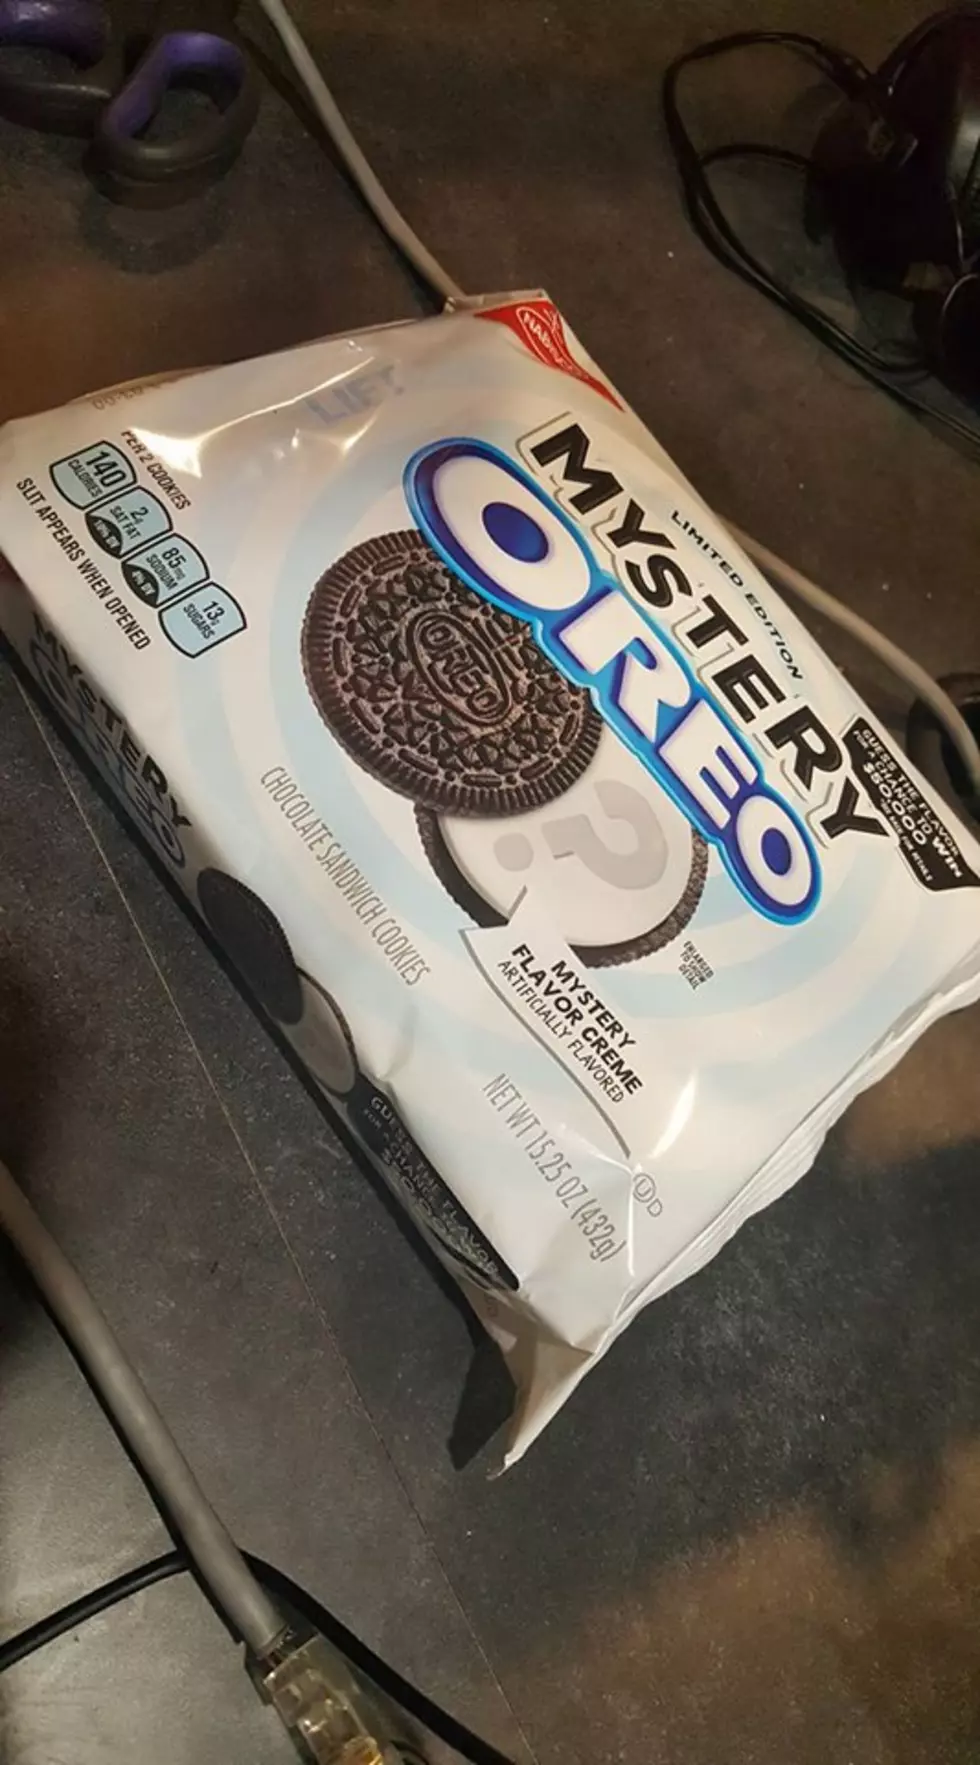 Why Do They Have to Mess With Oreos?